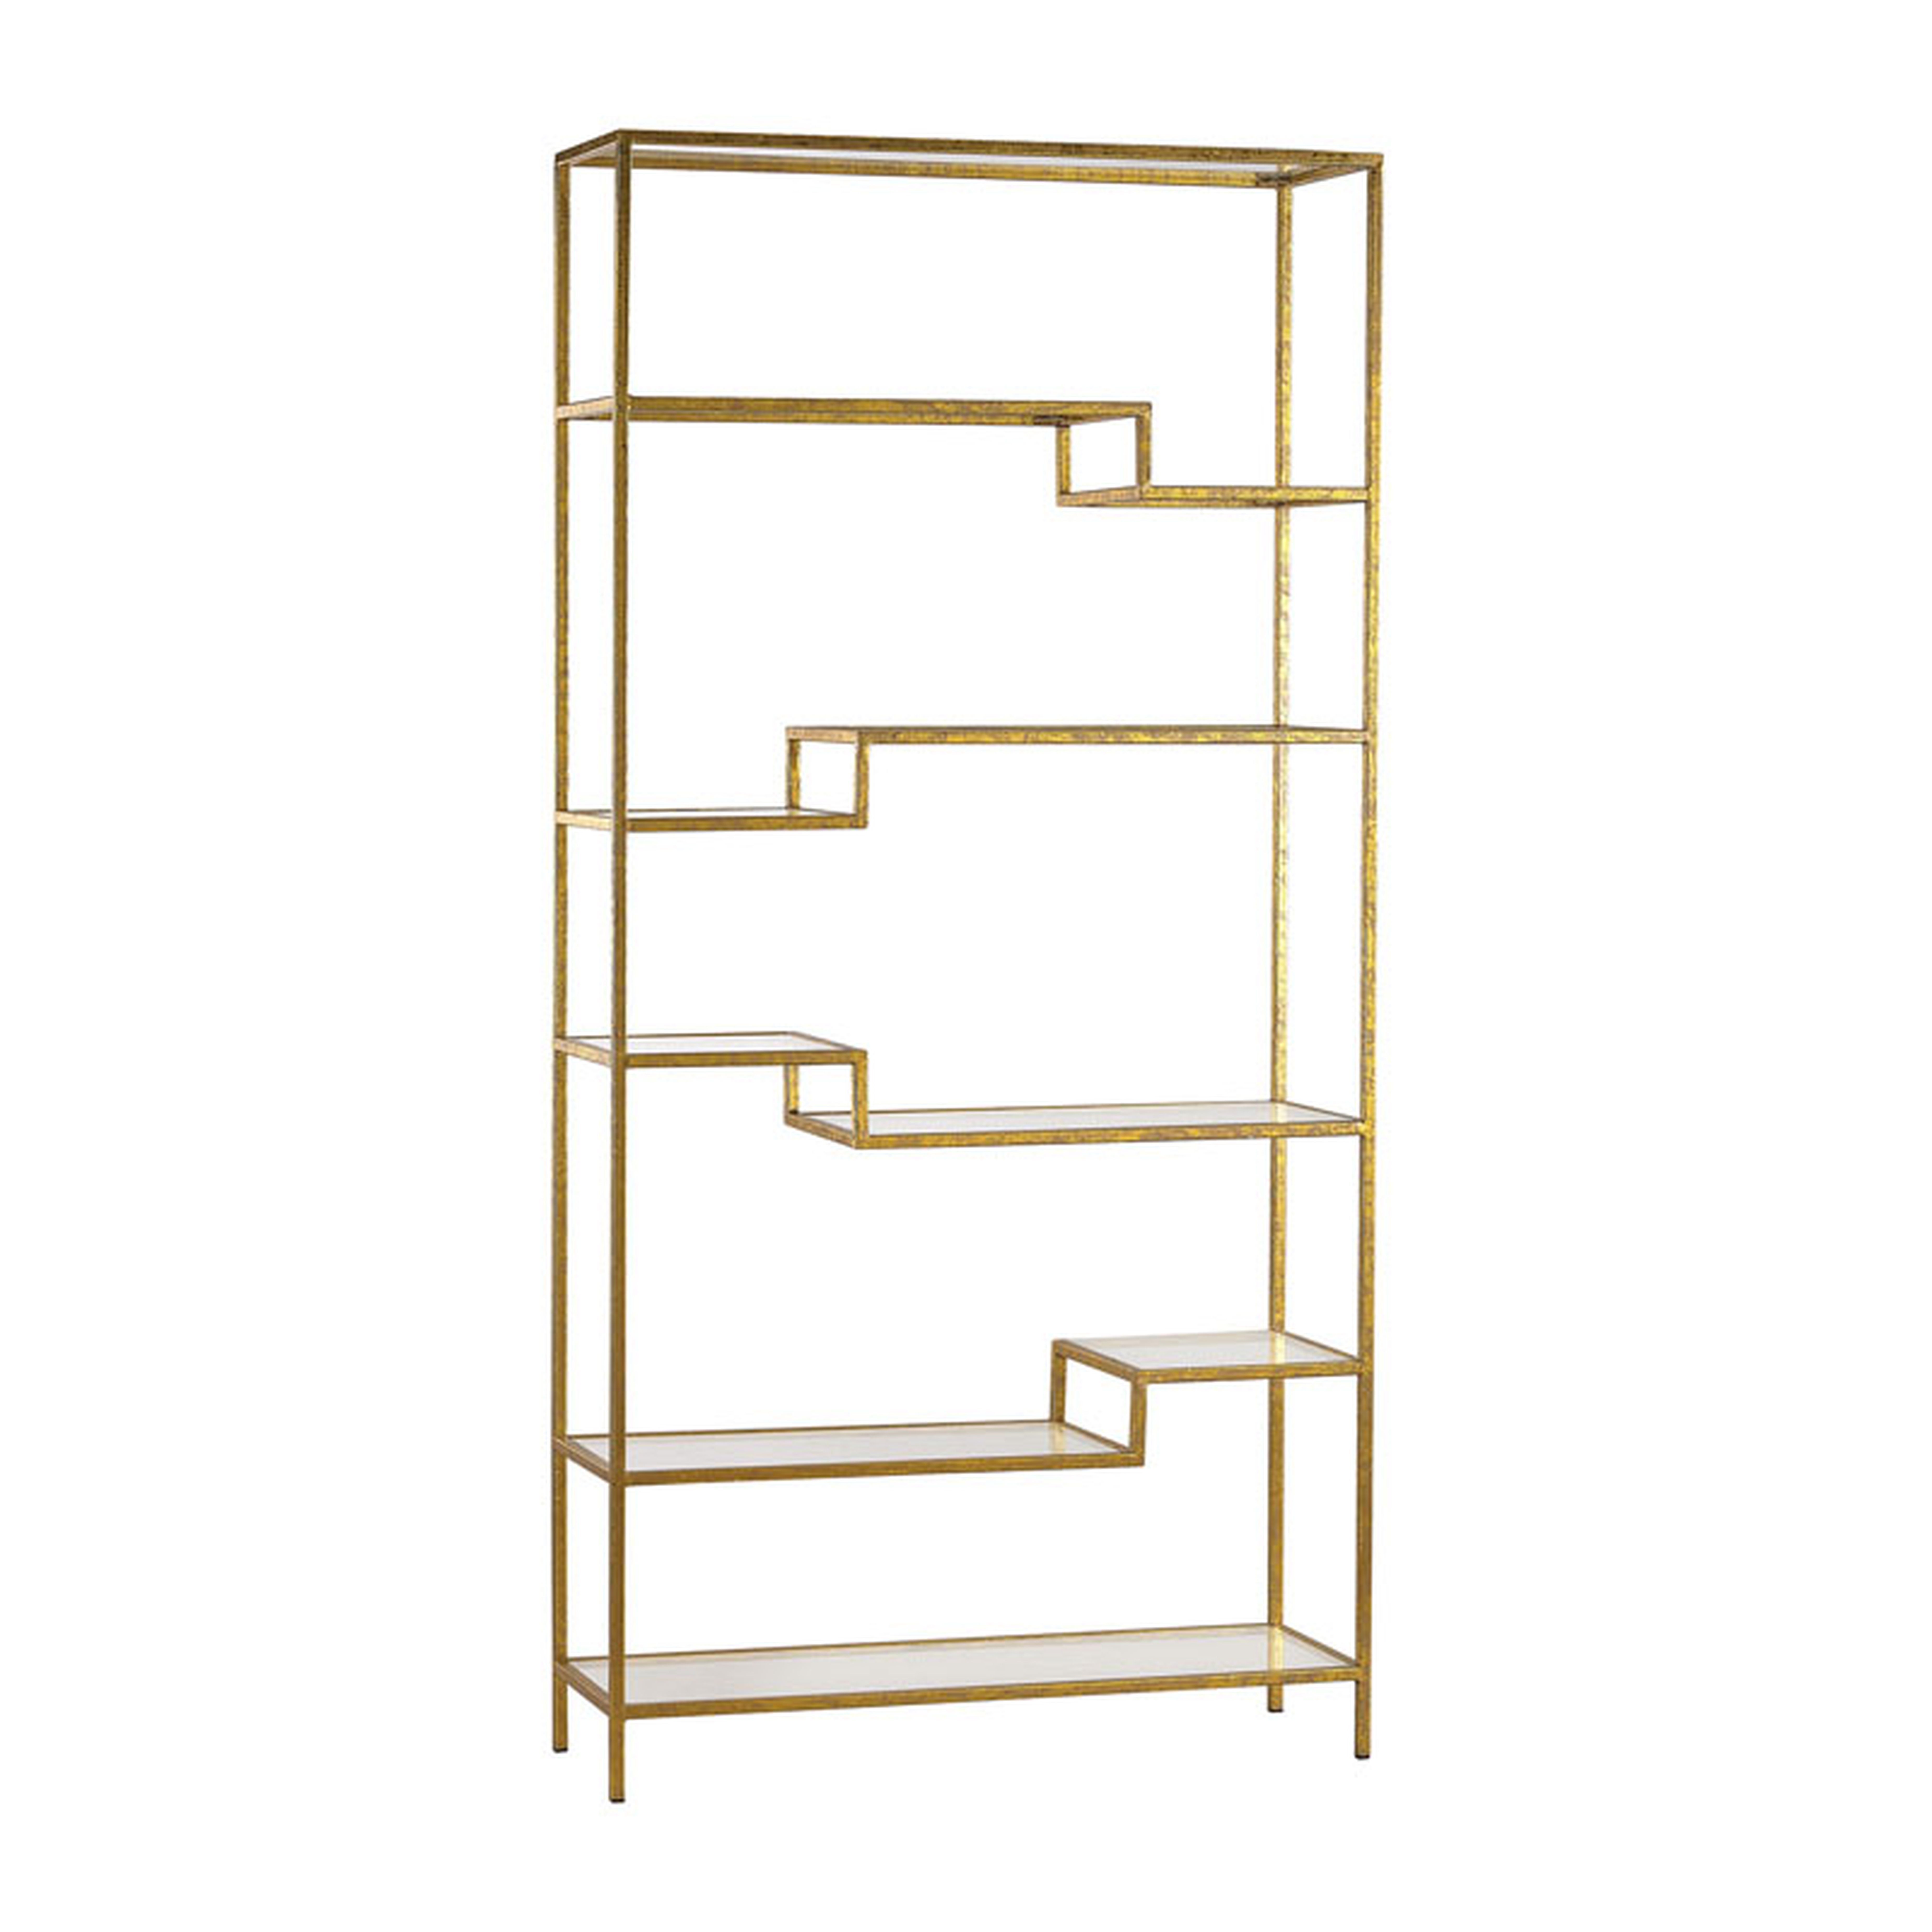 Gold and Mirrored Shelving Unit - Elk Home